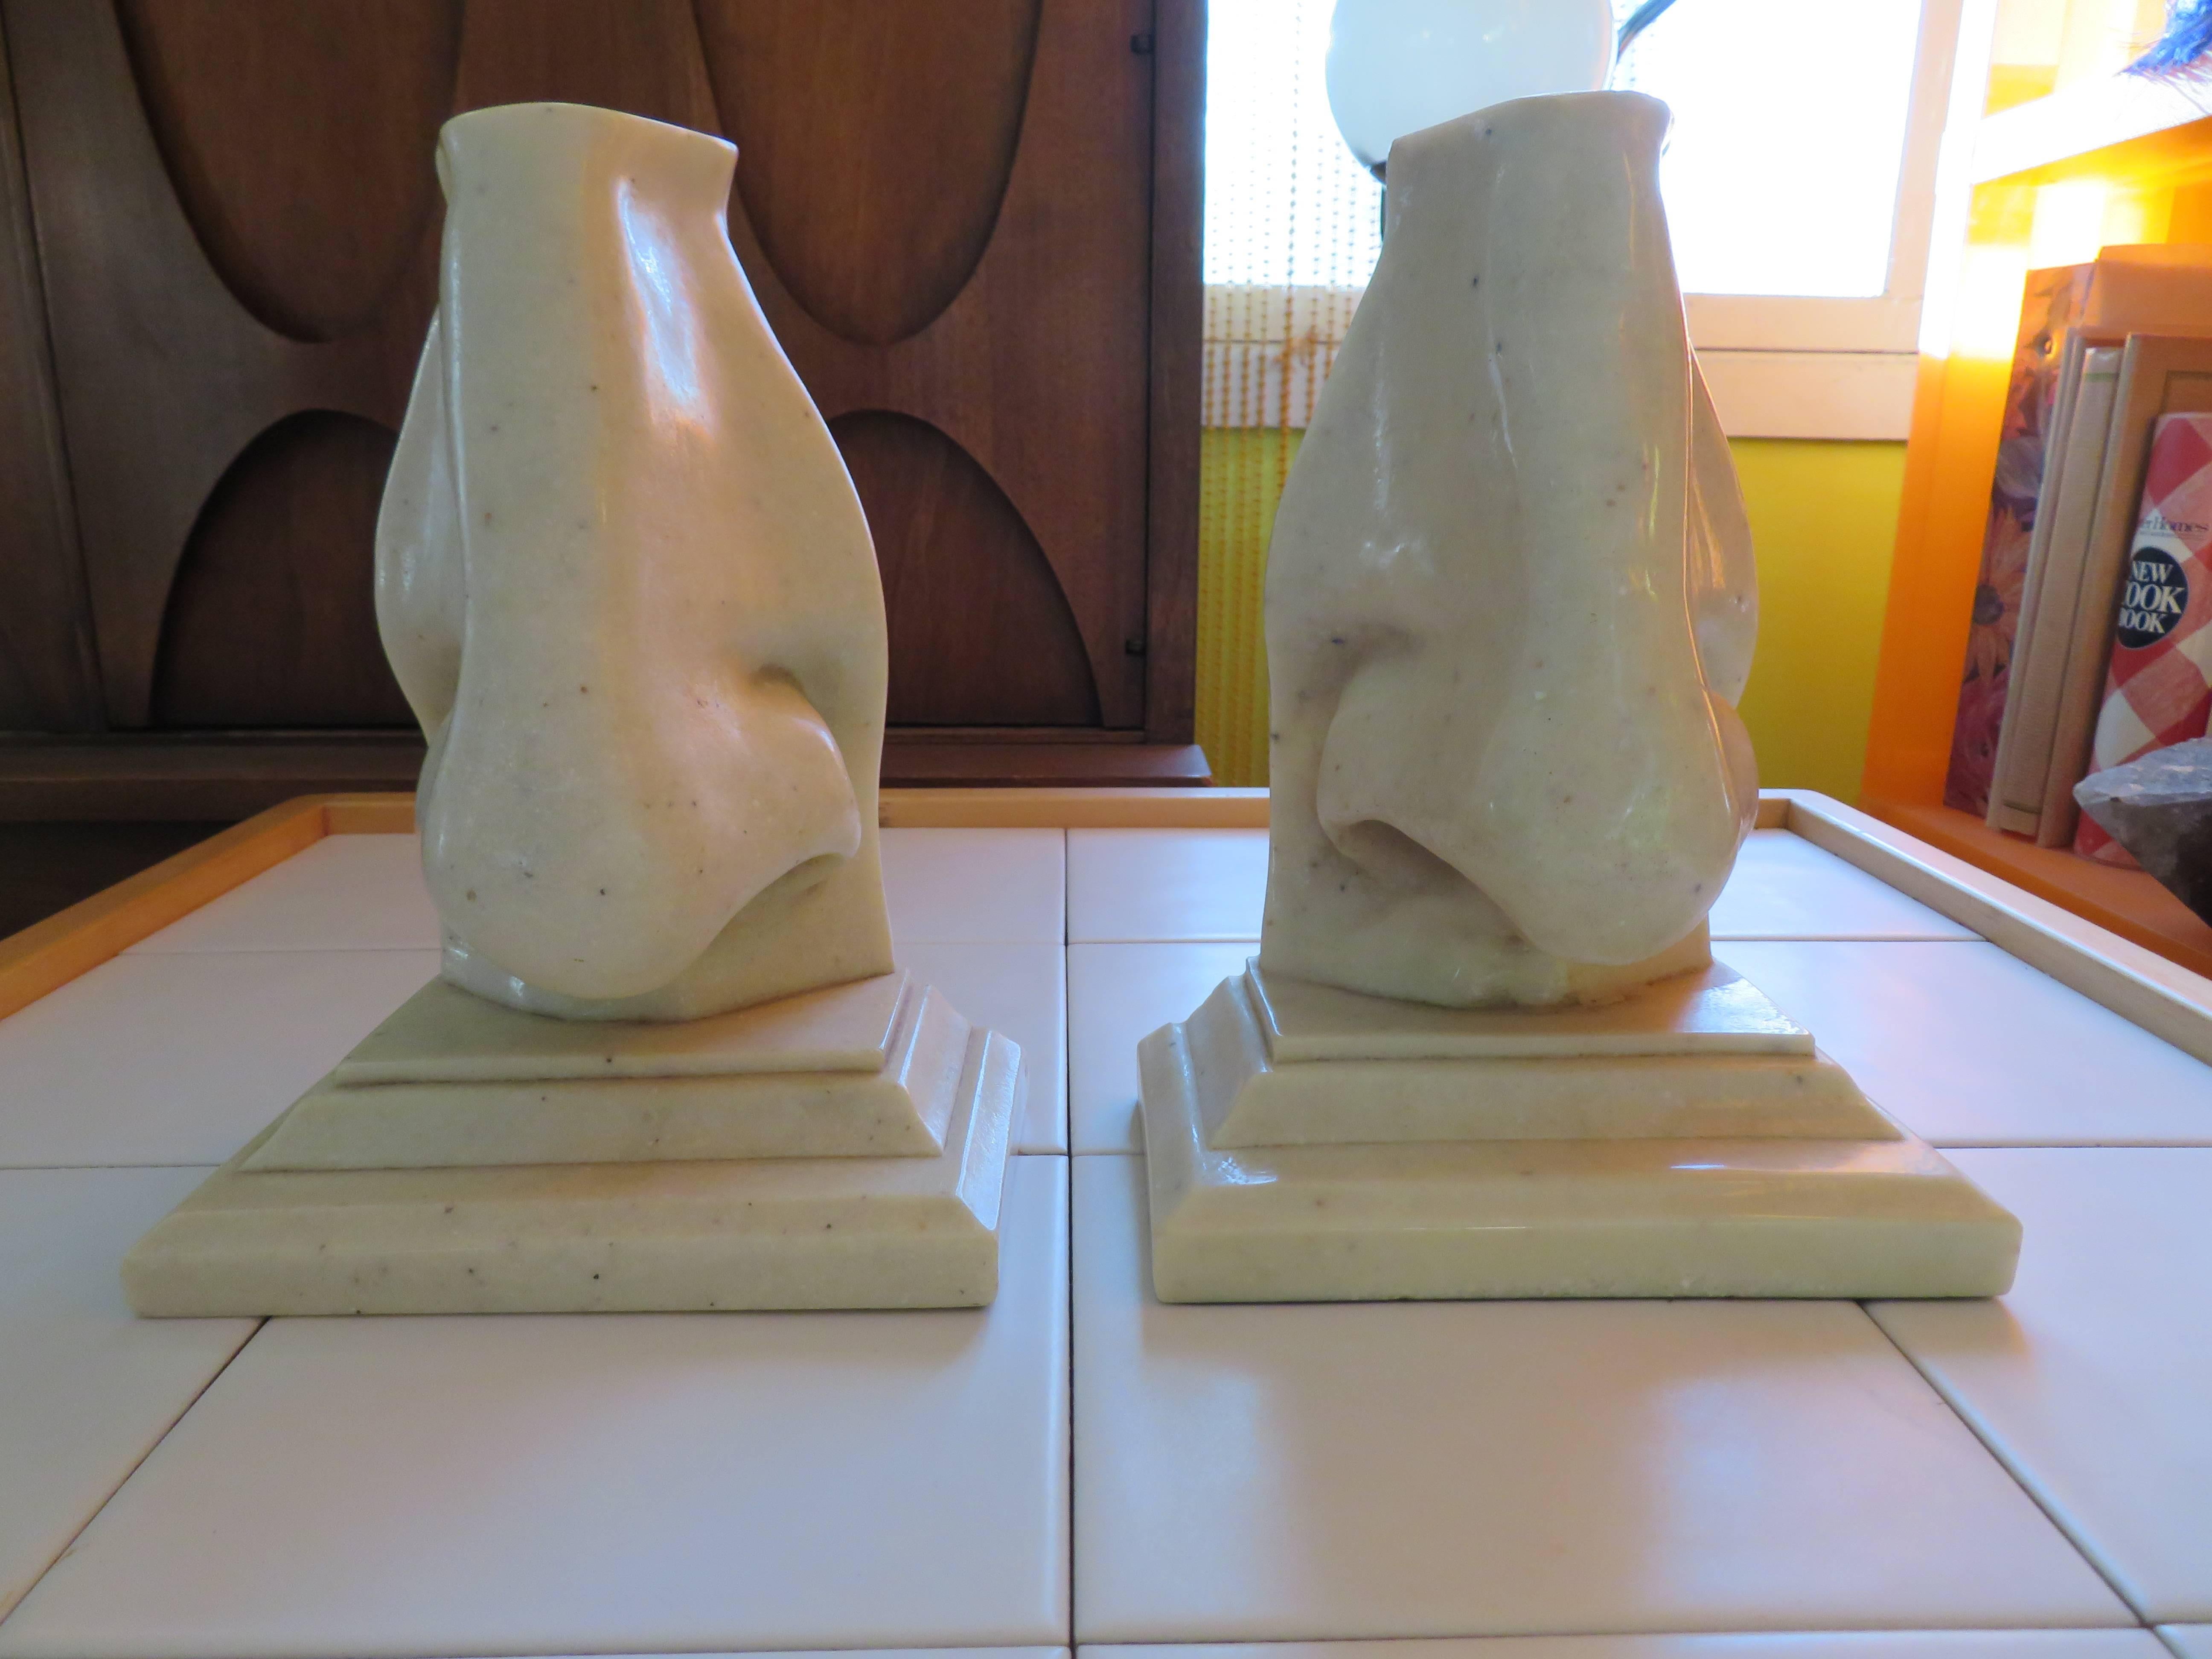 Unusual pair of oversized Italian marble composition bookends. Outrageous and fun, a must have for the person who already has everything. I am sure they don't have a pair of these!